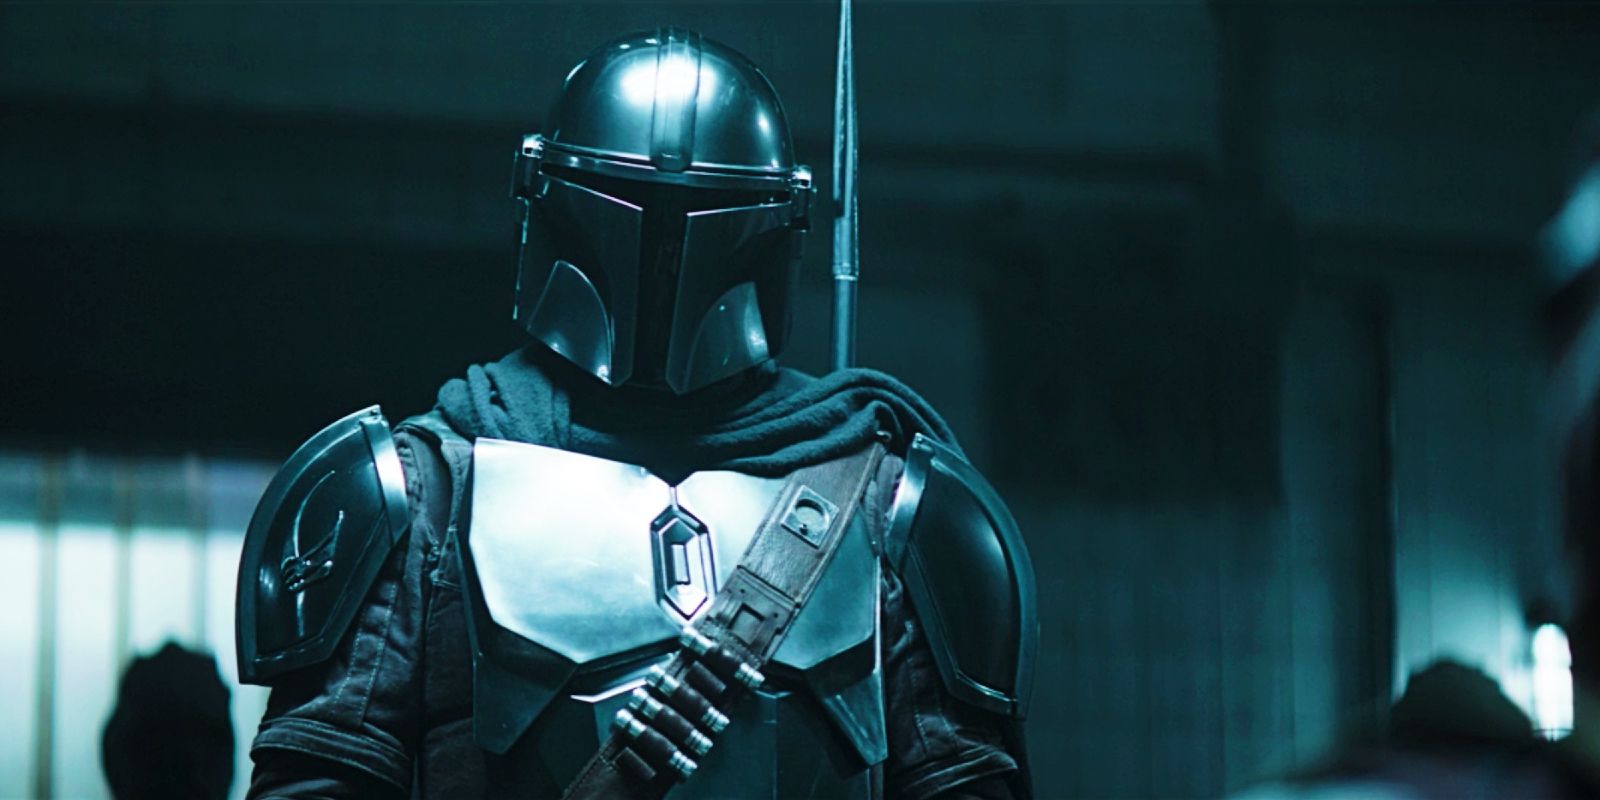 The Return of the Mandalorian from The Book of Boba Fett